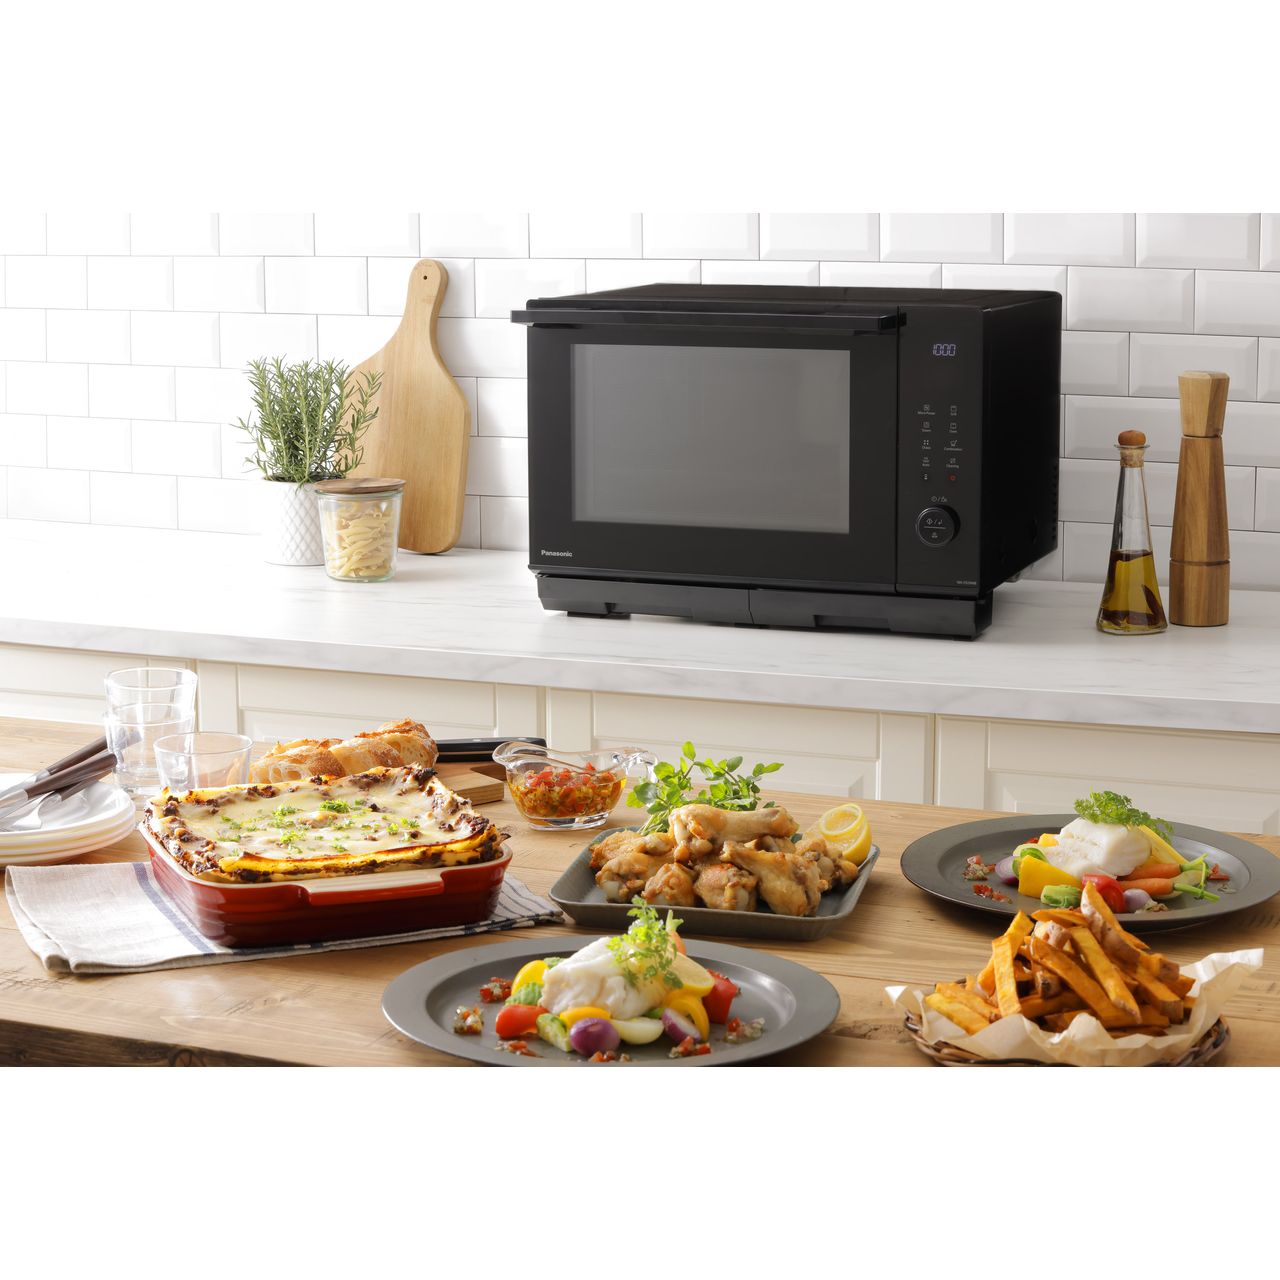 Panasonic Nn Ds59nbbpq 4 In 1 Steam Combination Microwave Oven Black